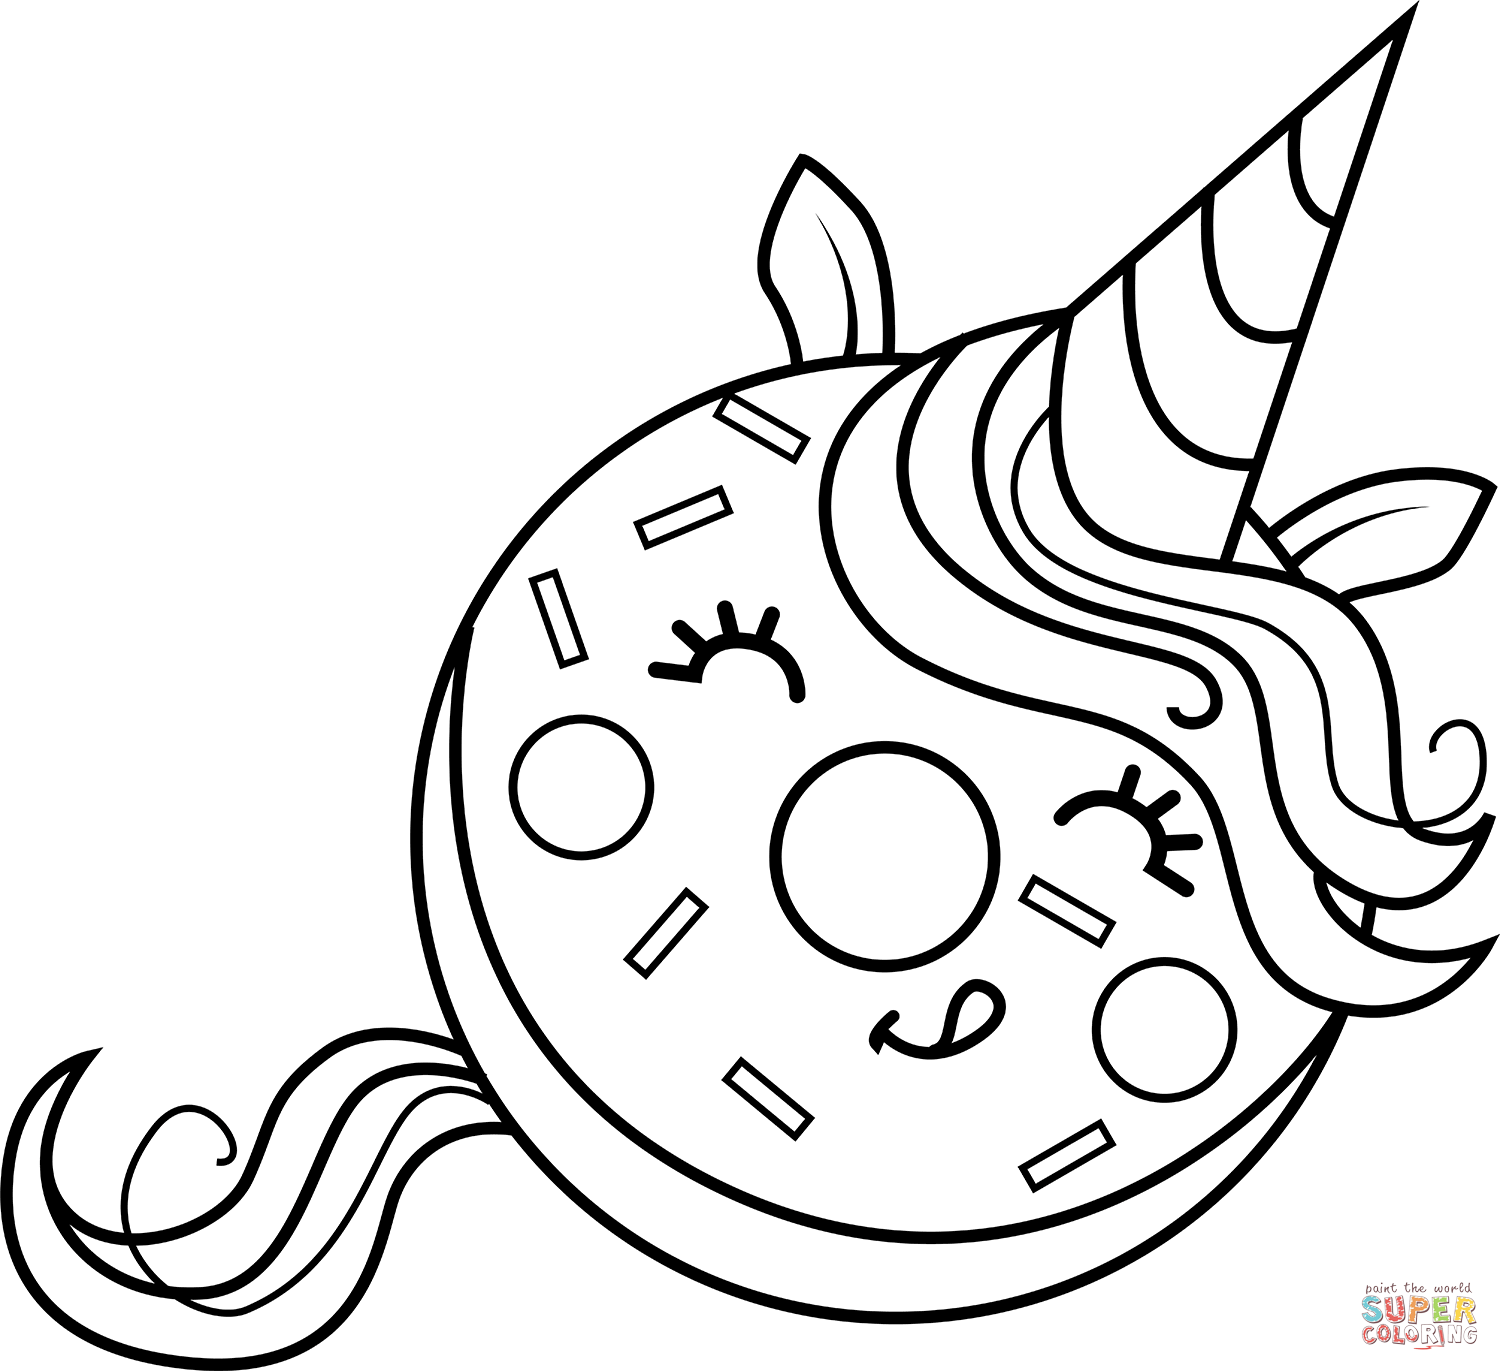 Unicorn donut coloring page free printable coloring pages